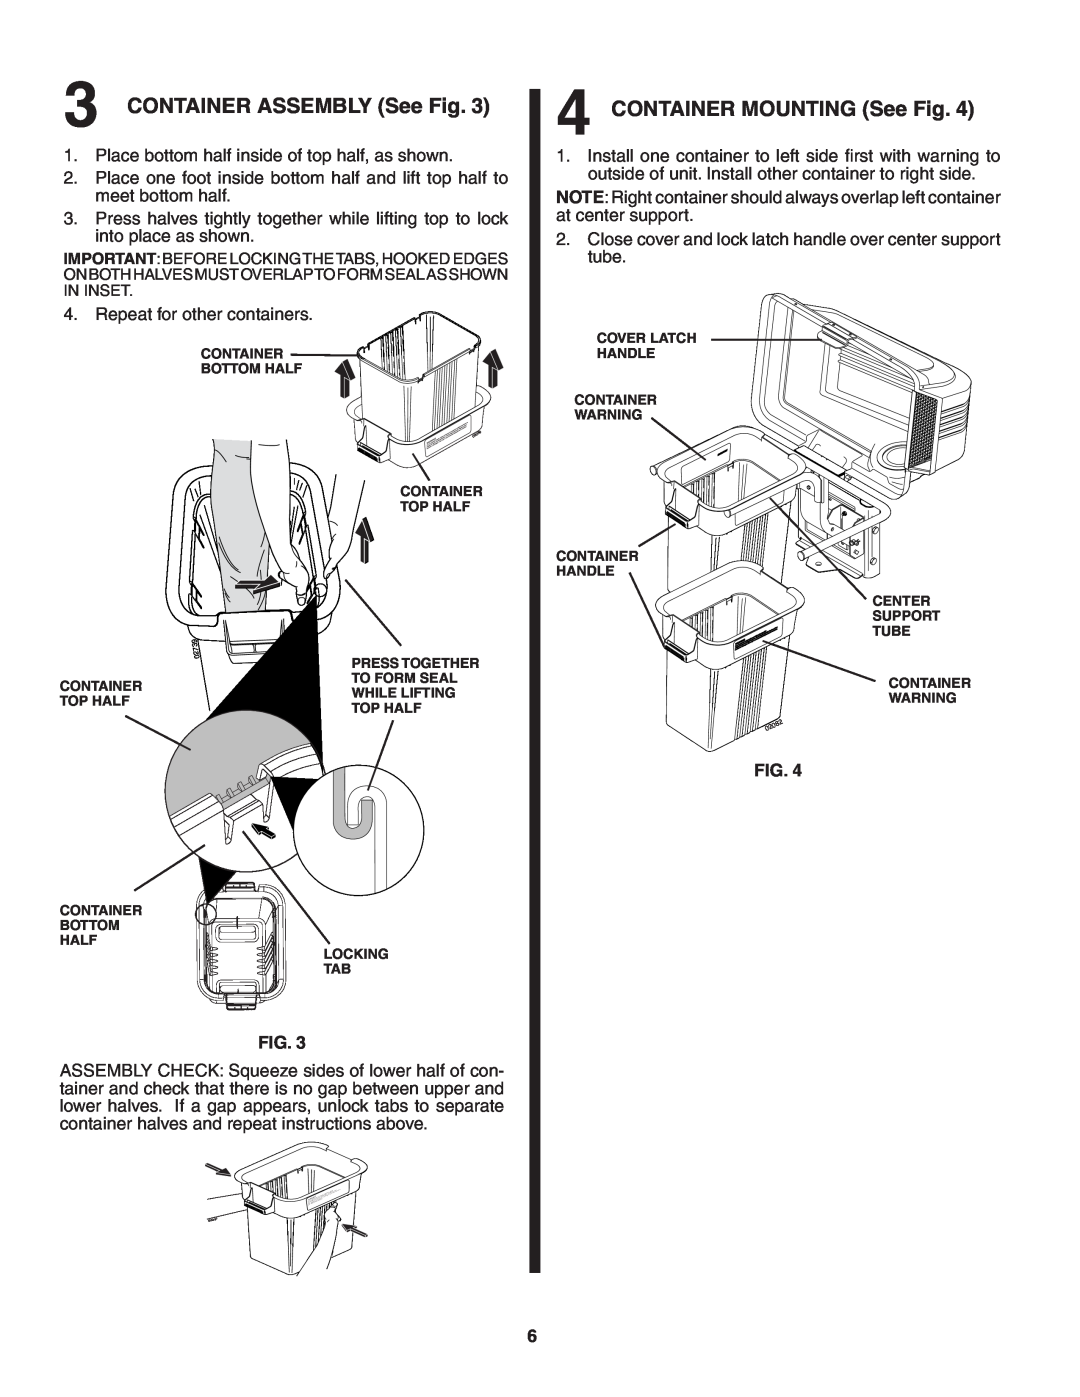 Poulan QC42B, 954 04 05-10, 183187 owner manual CONTAINER ASSEMBLY See Fig, CONTAINER MOUNTING See Fig 